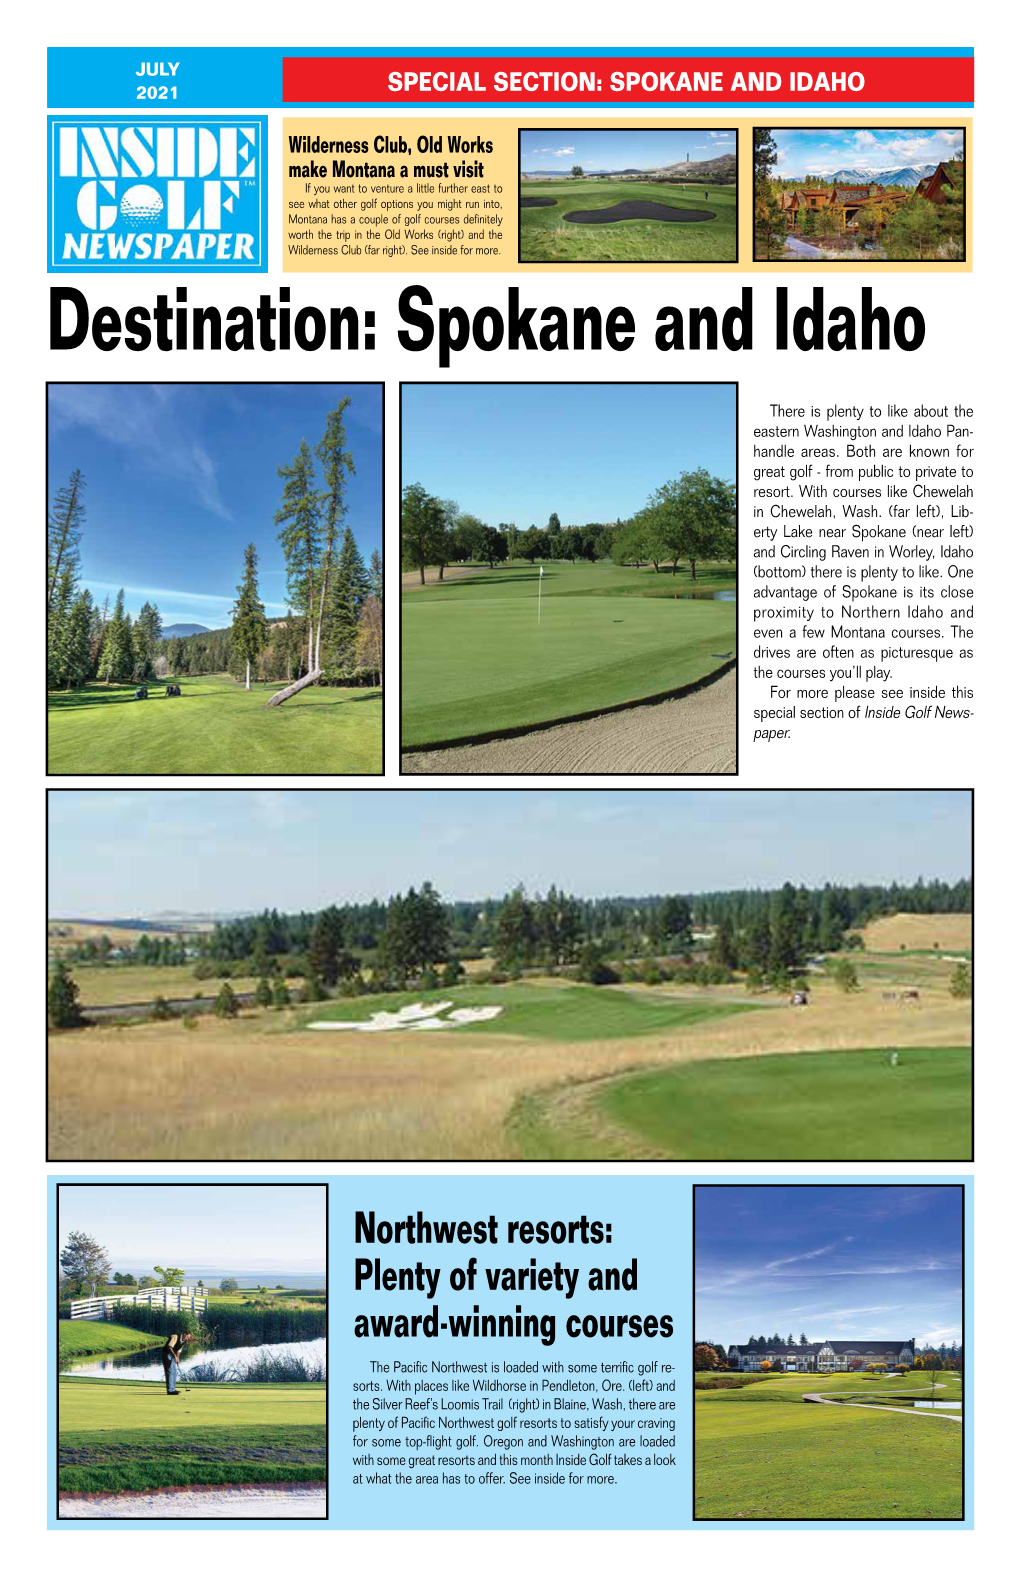 Northwest Resorts: Plenty of Variety and Award-Winning Courses the Pacific Northwest Is Loaded with Some Terrific Golf Re- Sorts